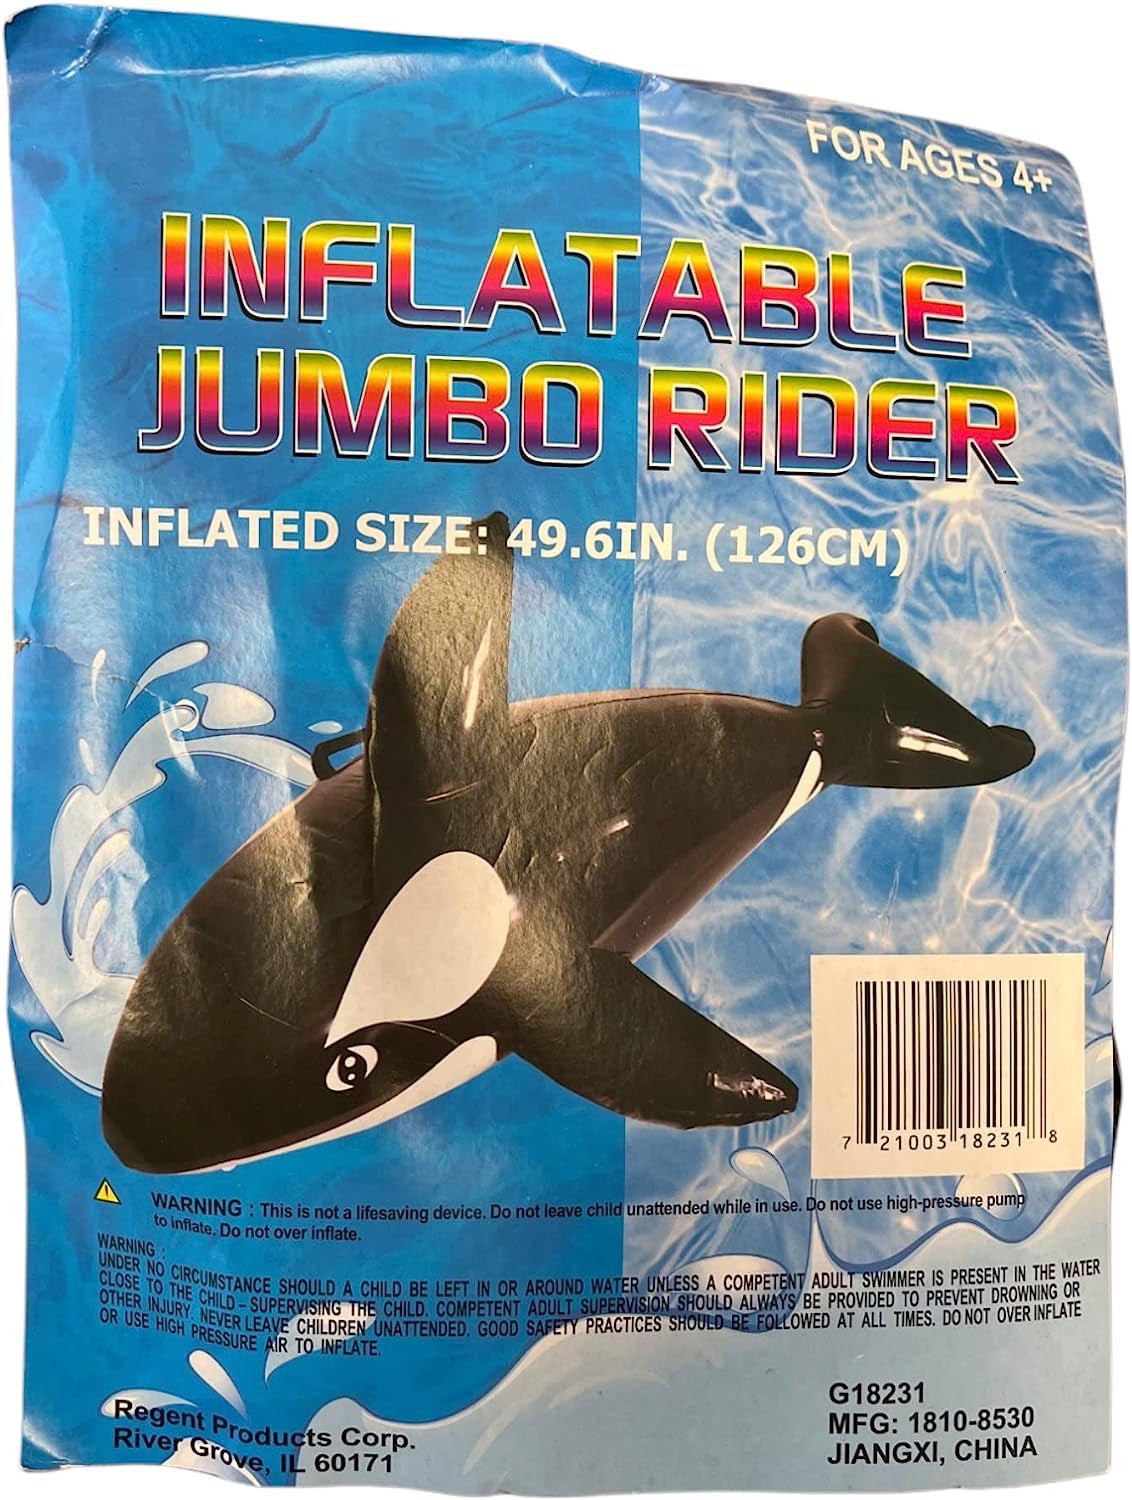 Inflatable Shark Pool Float- Jumbo Rider- Ride-On Pool Toy- Inflated Size 49.6 in- Ages 4+- Outdoor Swim Raft Toy- Summer Beach Floatie for Kids and Adults, White